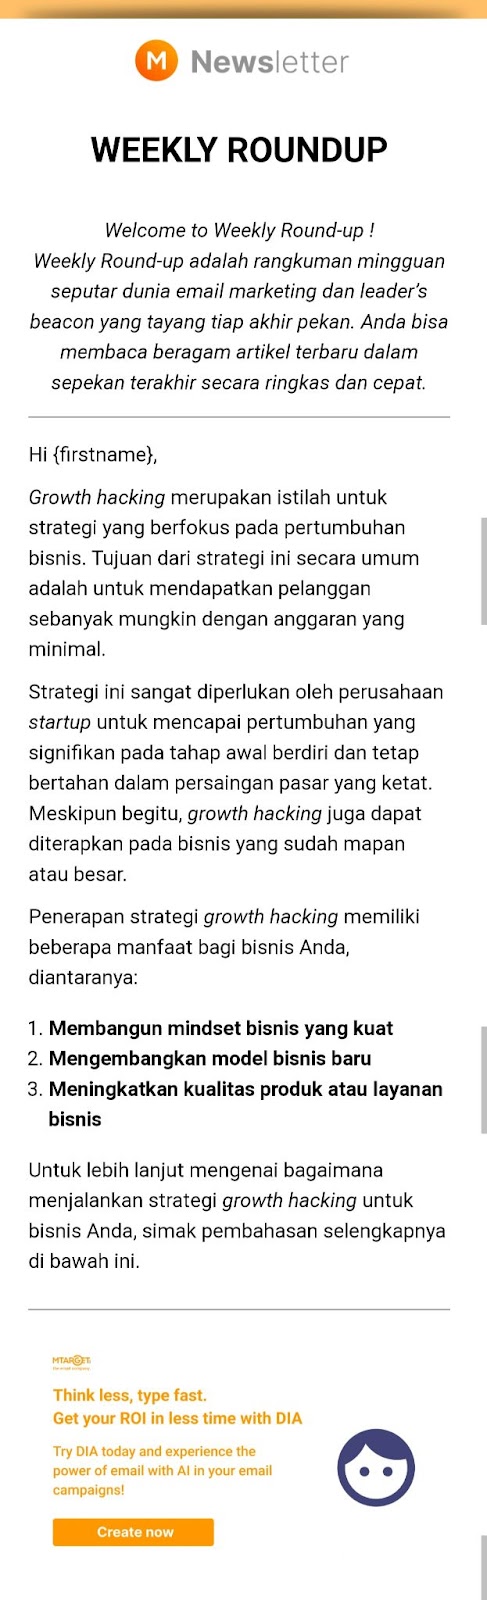 Contoh Newsletter Email MTARGET